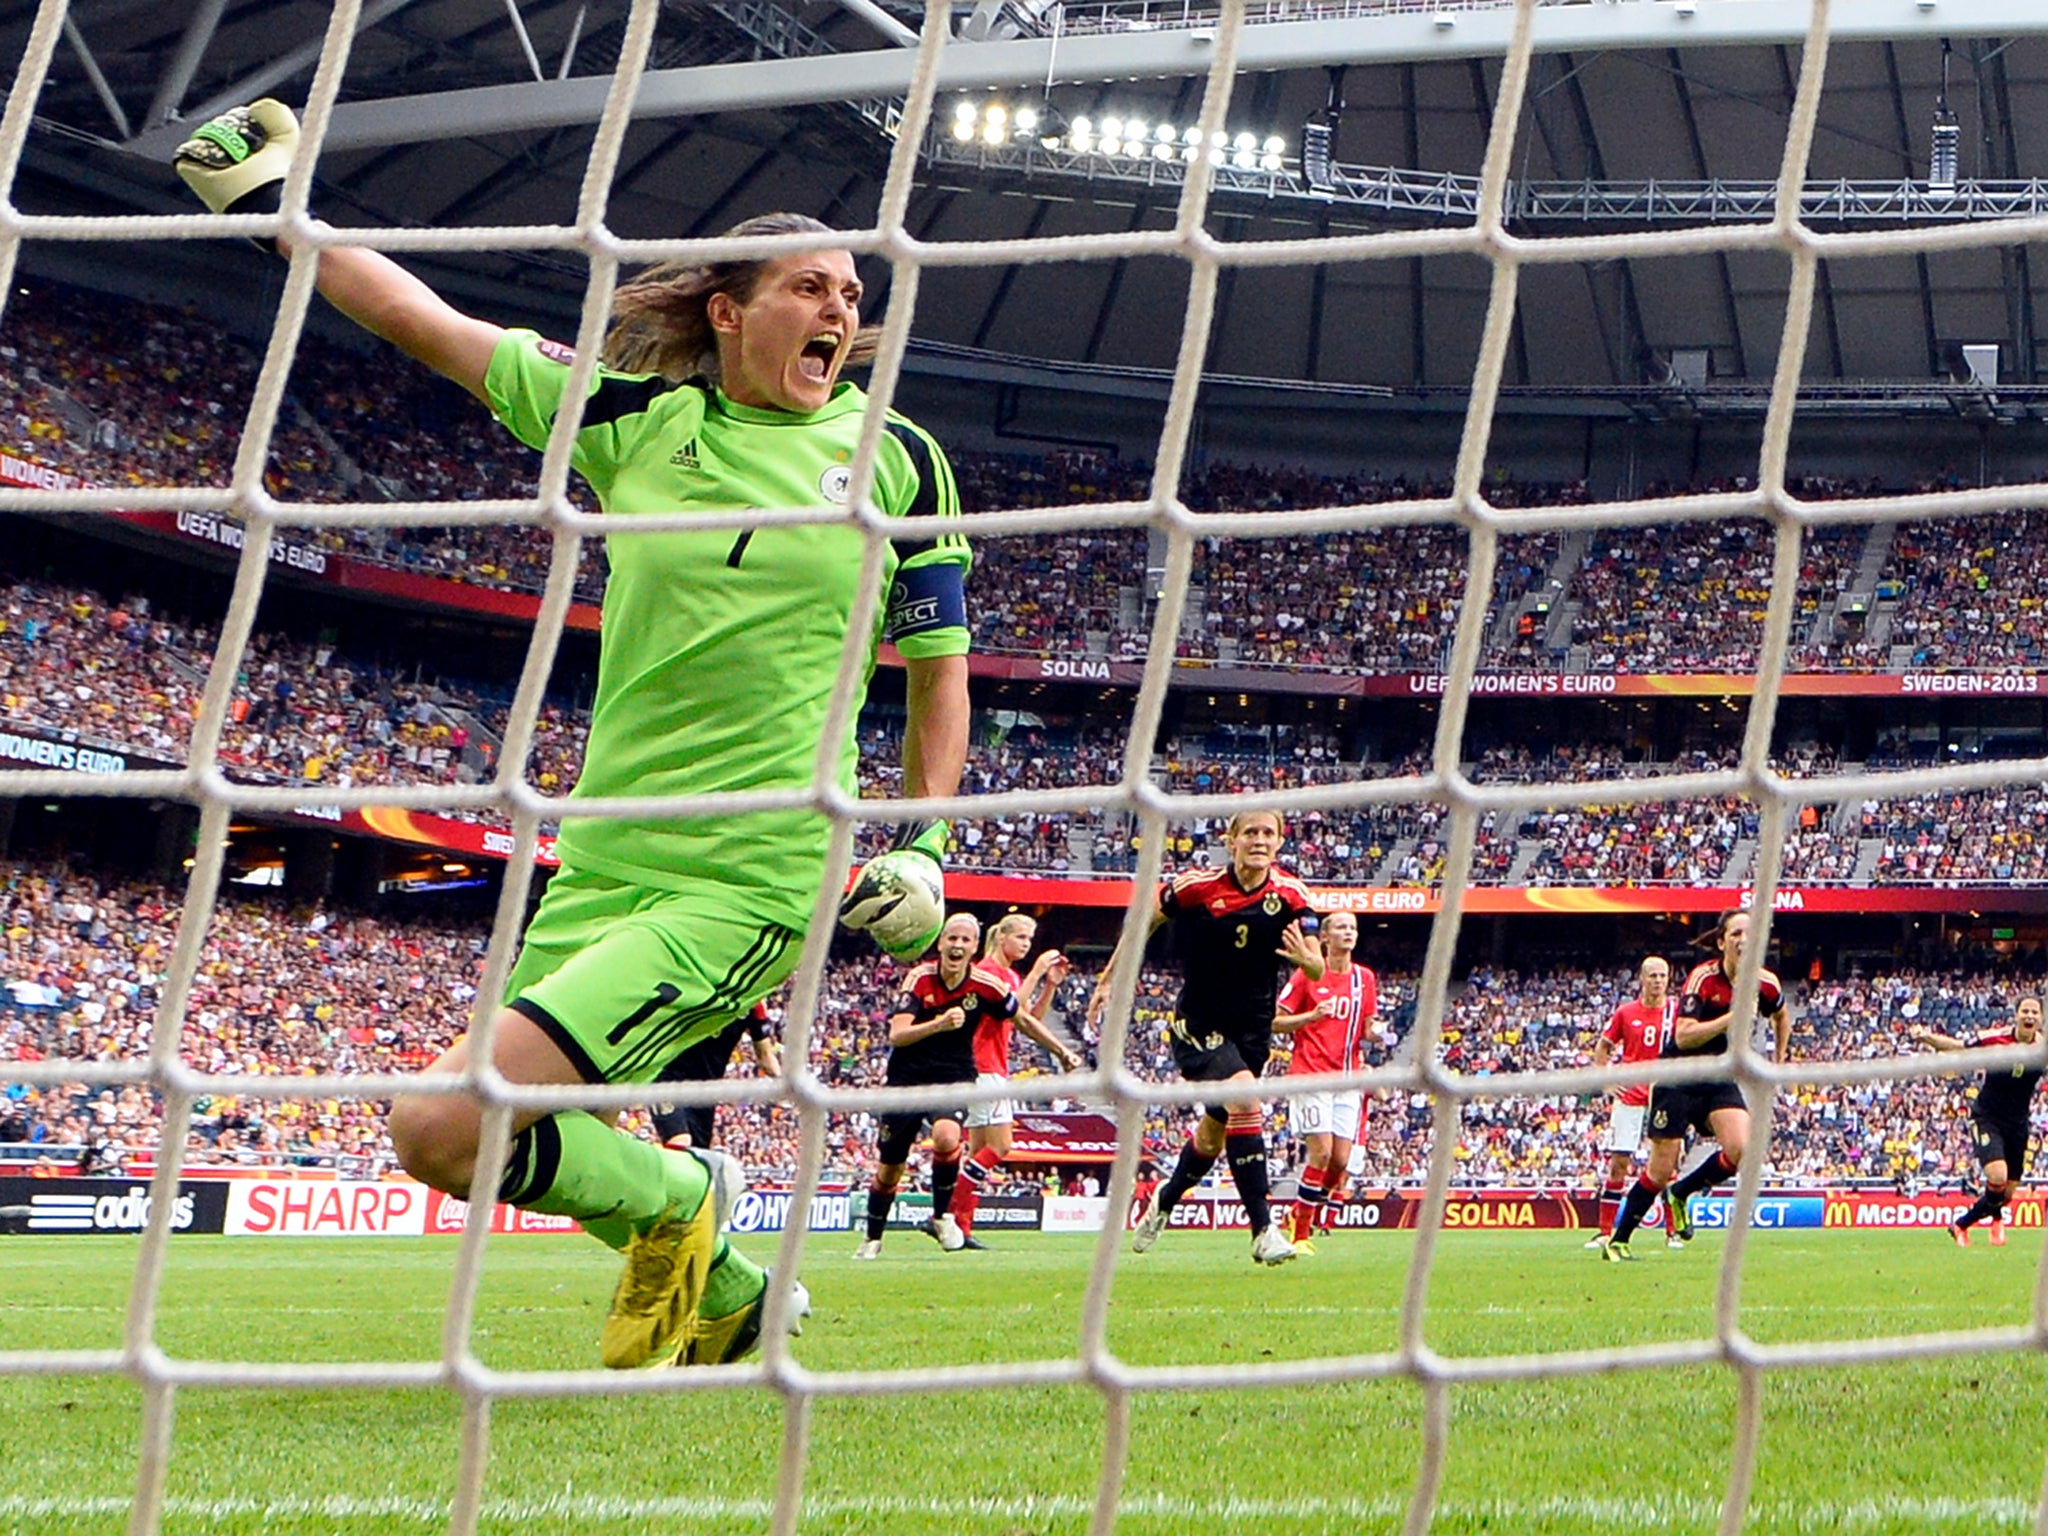 Germany's goalkeeper Nadine Angerer reacts after she saved a penalty shot during the UEFA Women's European Championship Euro 2013